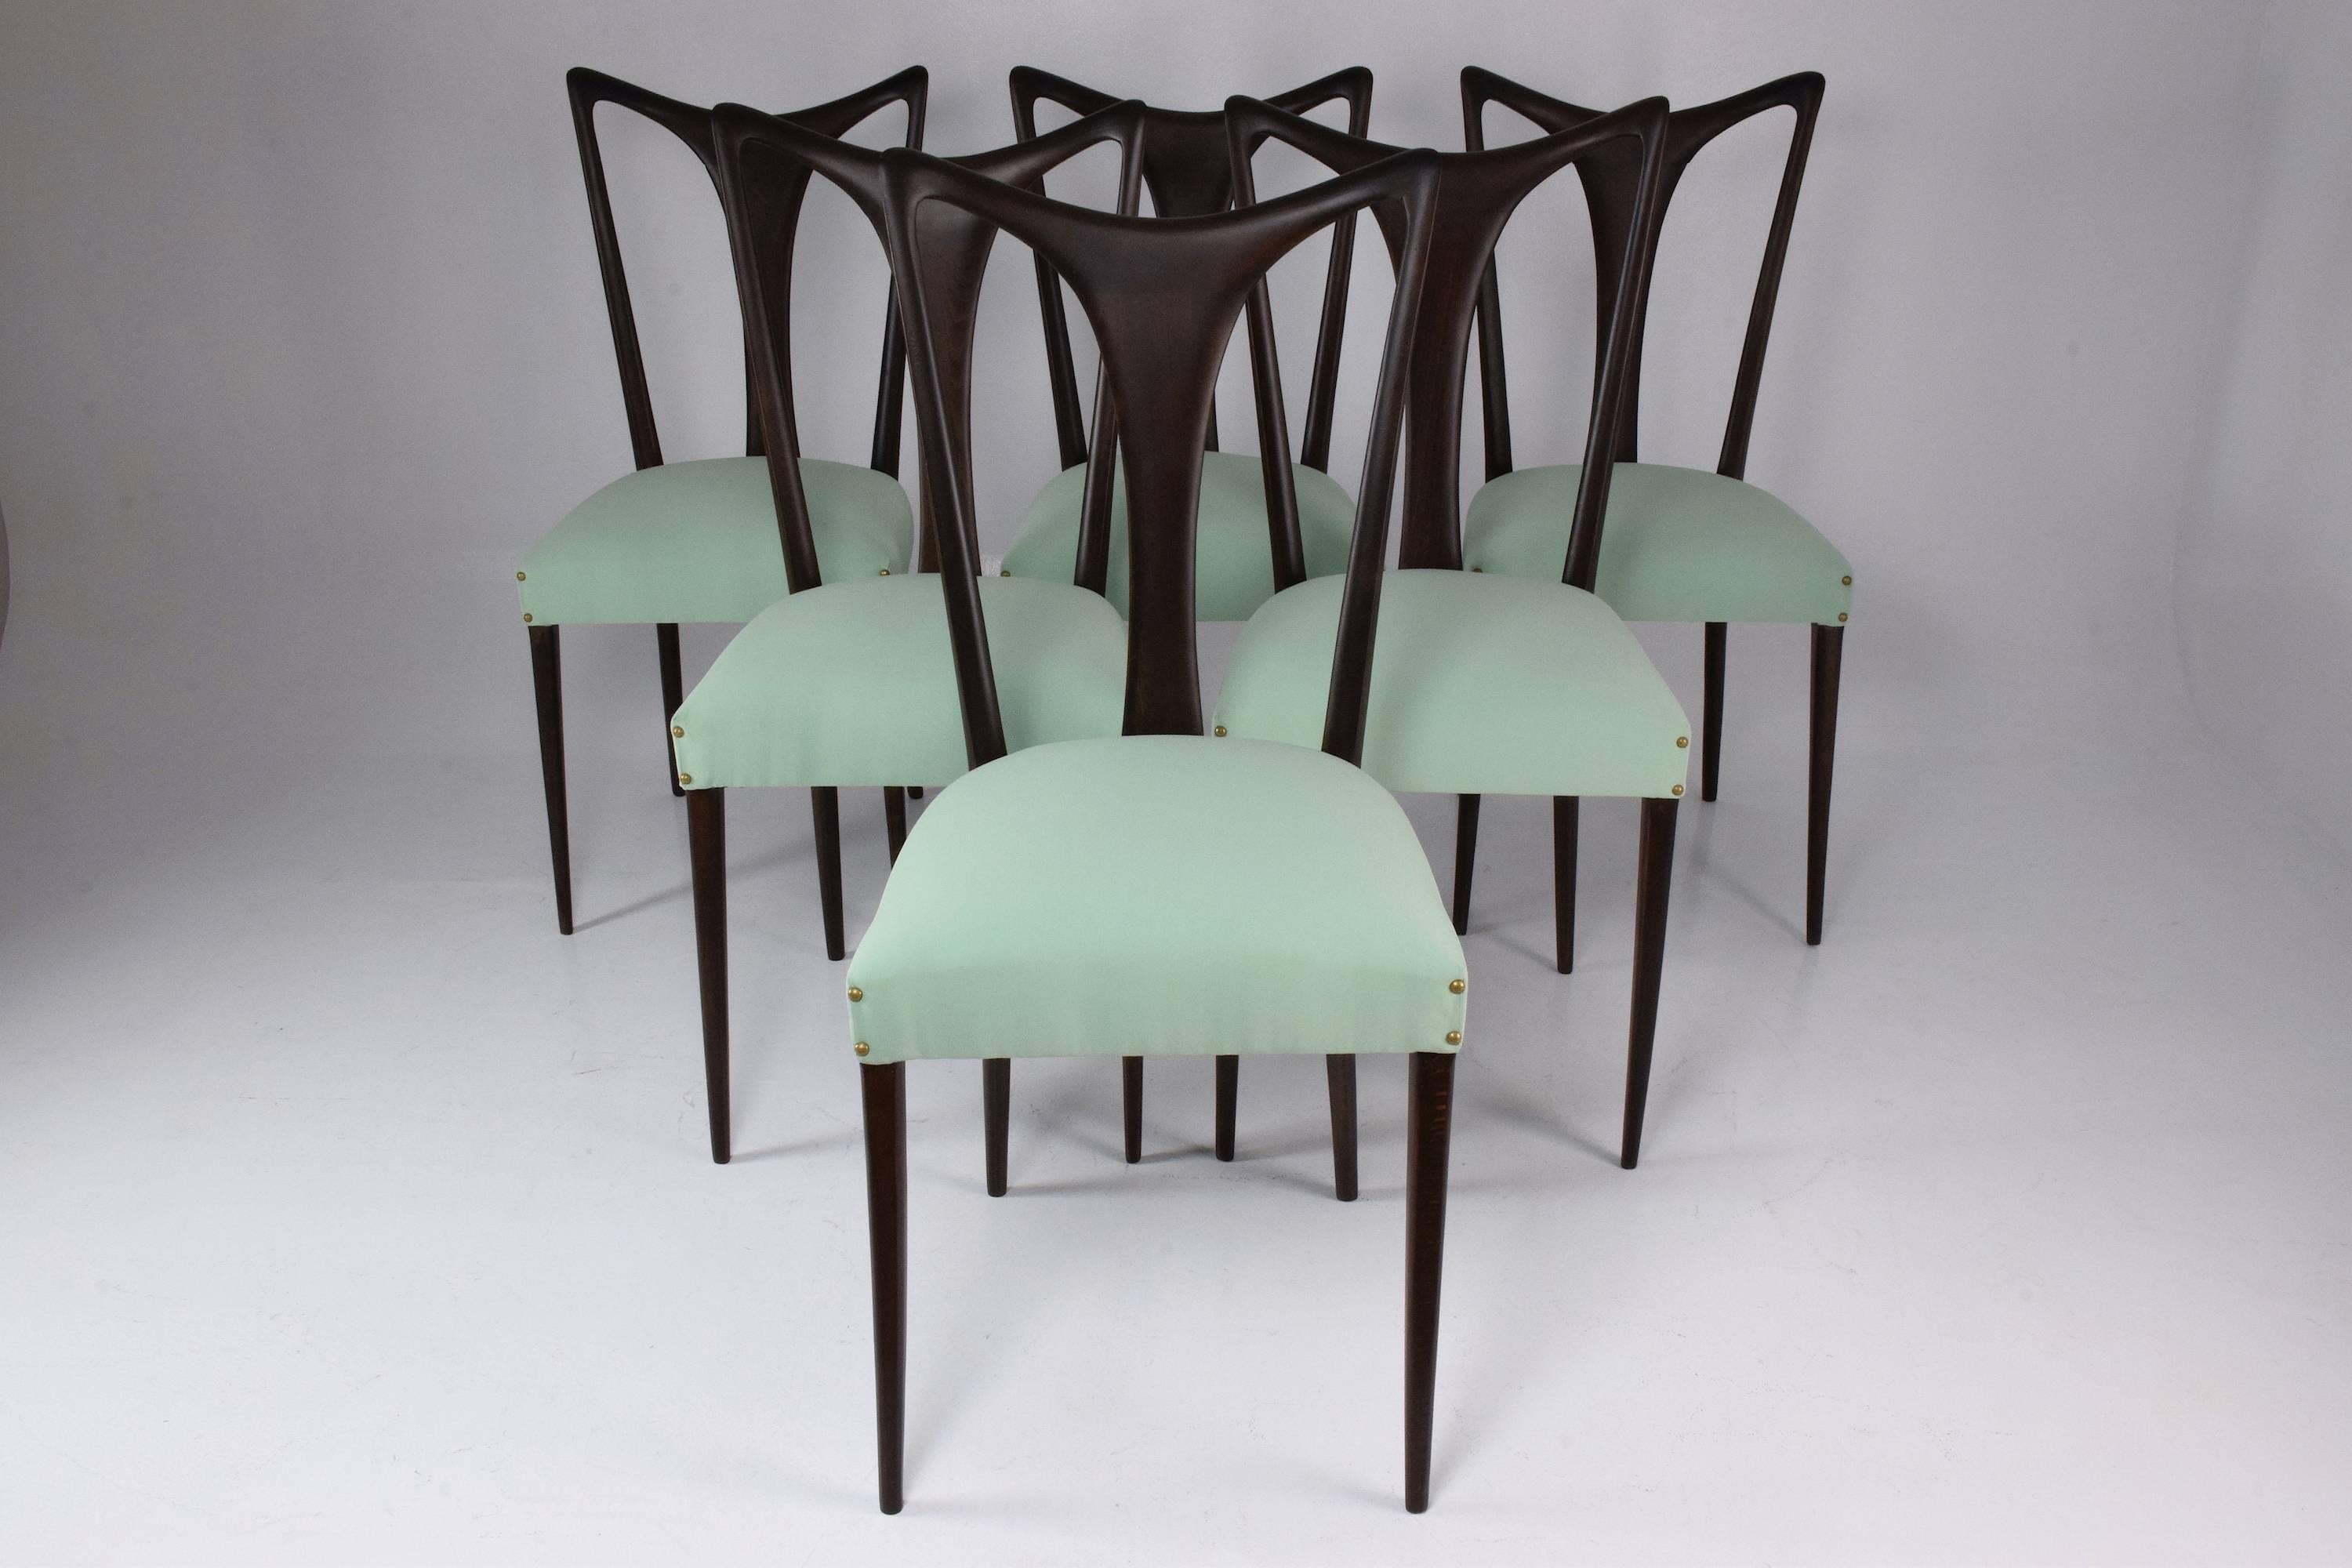 Set of six 20th century vintage Italian dining chairs designed by Guglielmo Ulrich, circa 1940s in fully restored condition composed of ebonized wood and re-upholstered with new nailhead trim in a beautiful Lelièvre Paris green mint fabric, 
Italy,